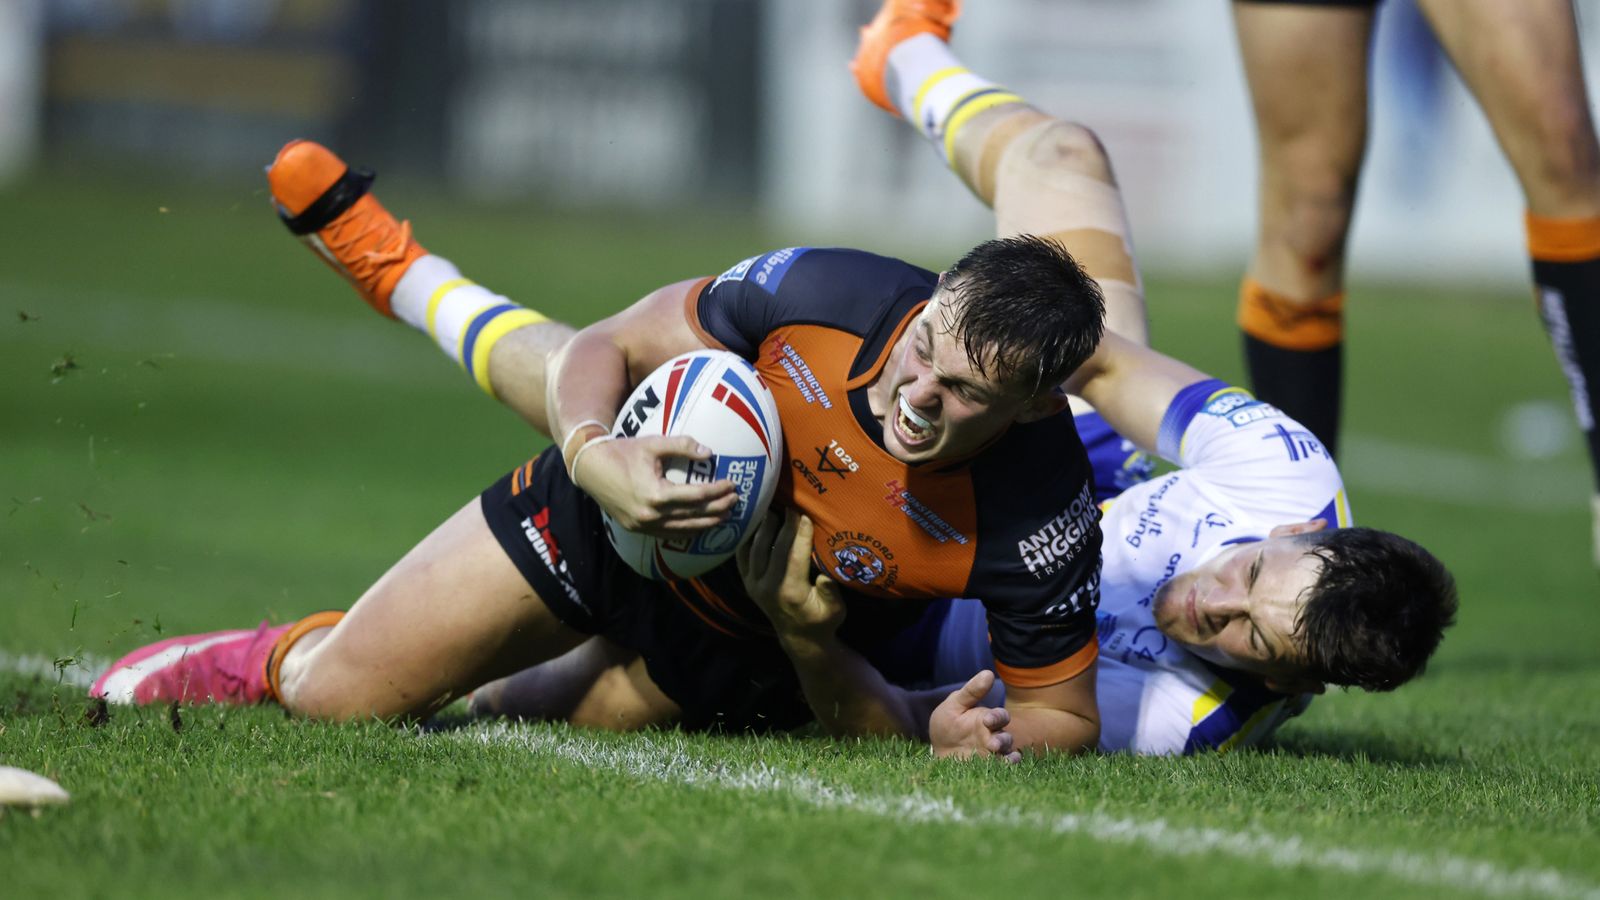 Super League: Struggling Castleford Tigers stun Warrington Wolves while Hull KR see off Wakefield Trinity | Rugby League News